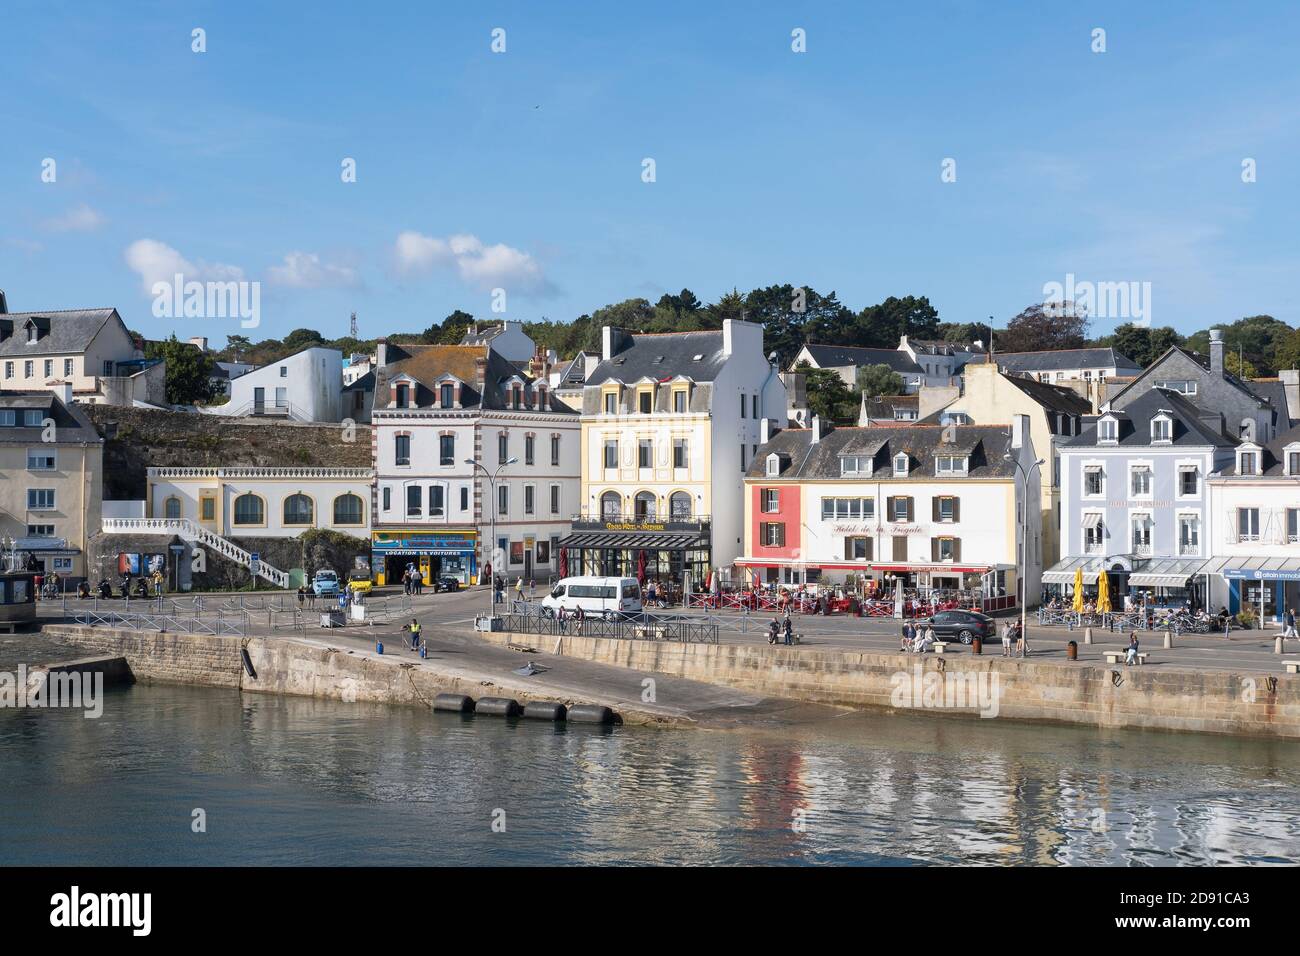 The harbour and waterside at Le Palais, Belle Ile, Brittany, France.  View from the sea. Stock Photo